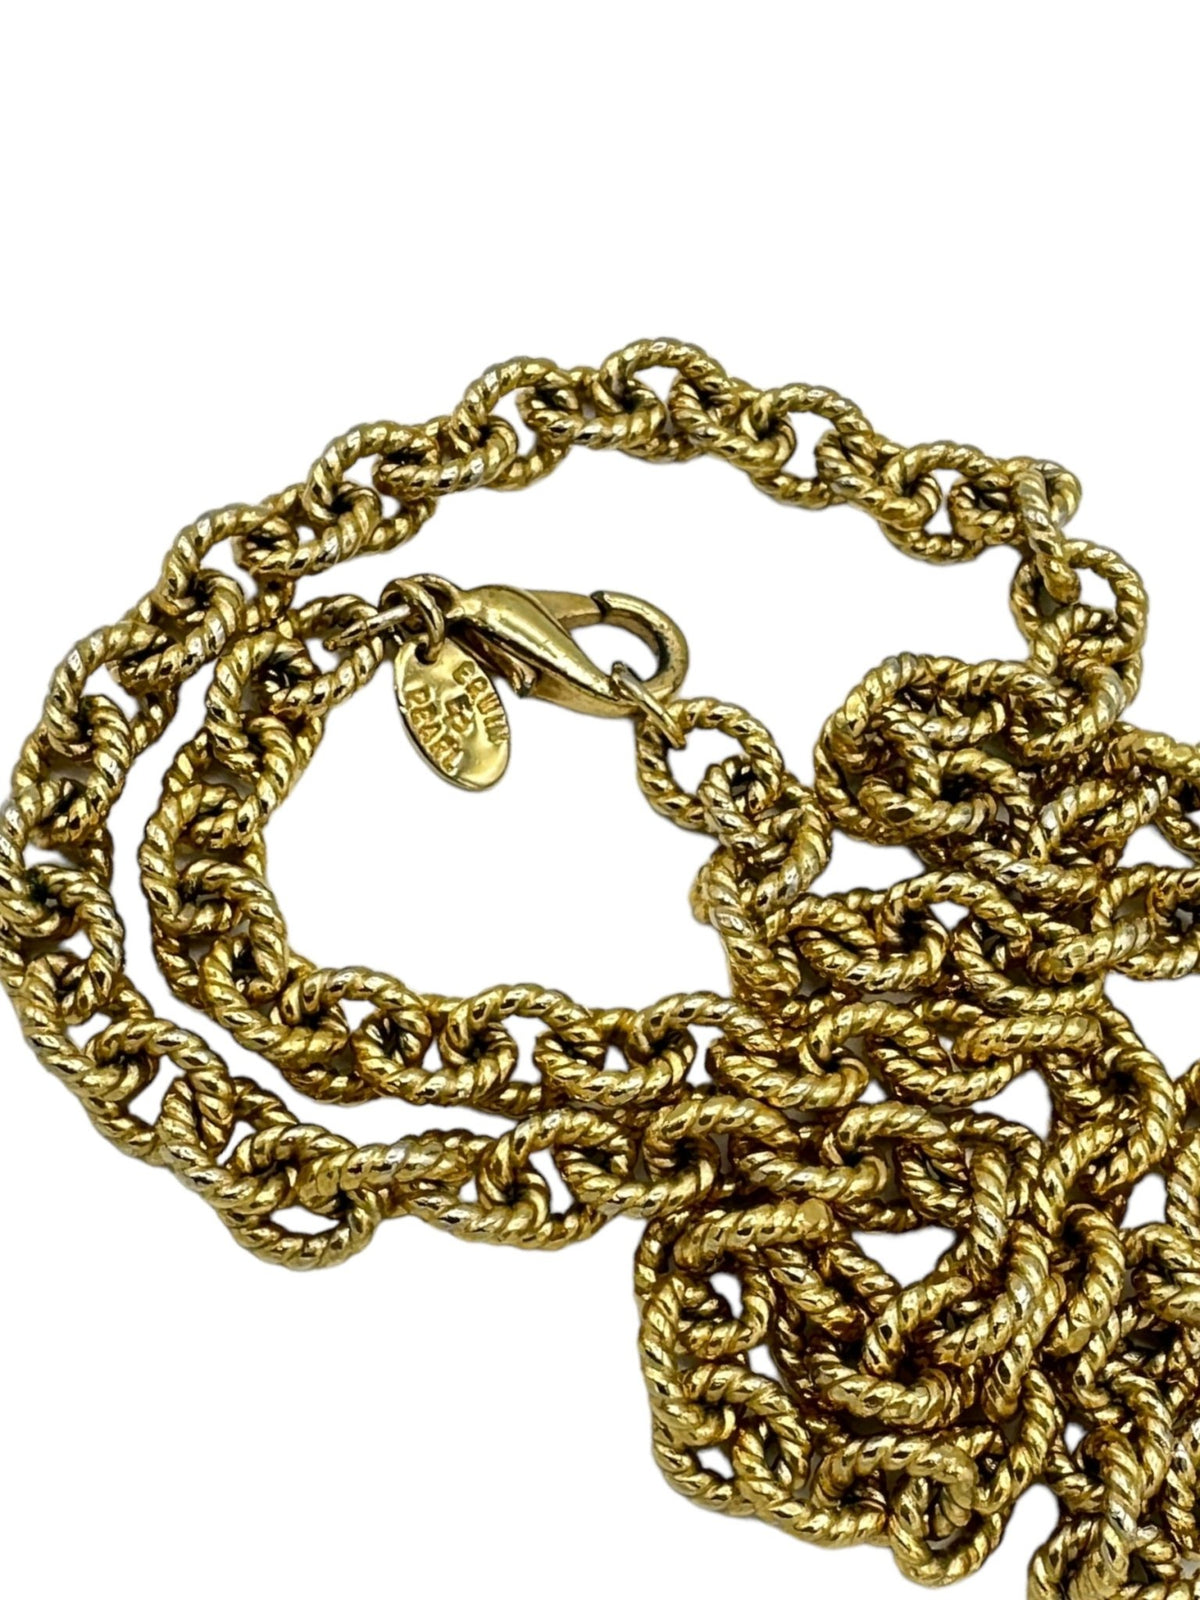 Erwin Pearl Vintage Jewelry Textured Cable Link Gold Layering Chain Necklace - 24 Wishes Vintage Jewelry